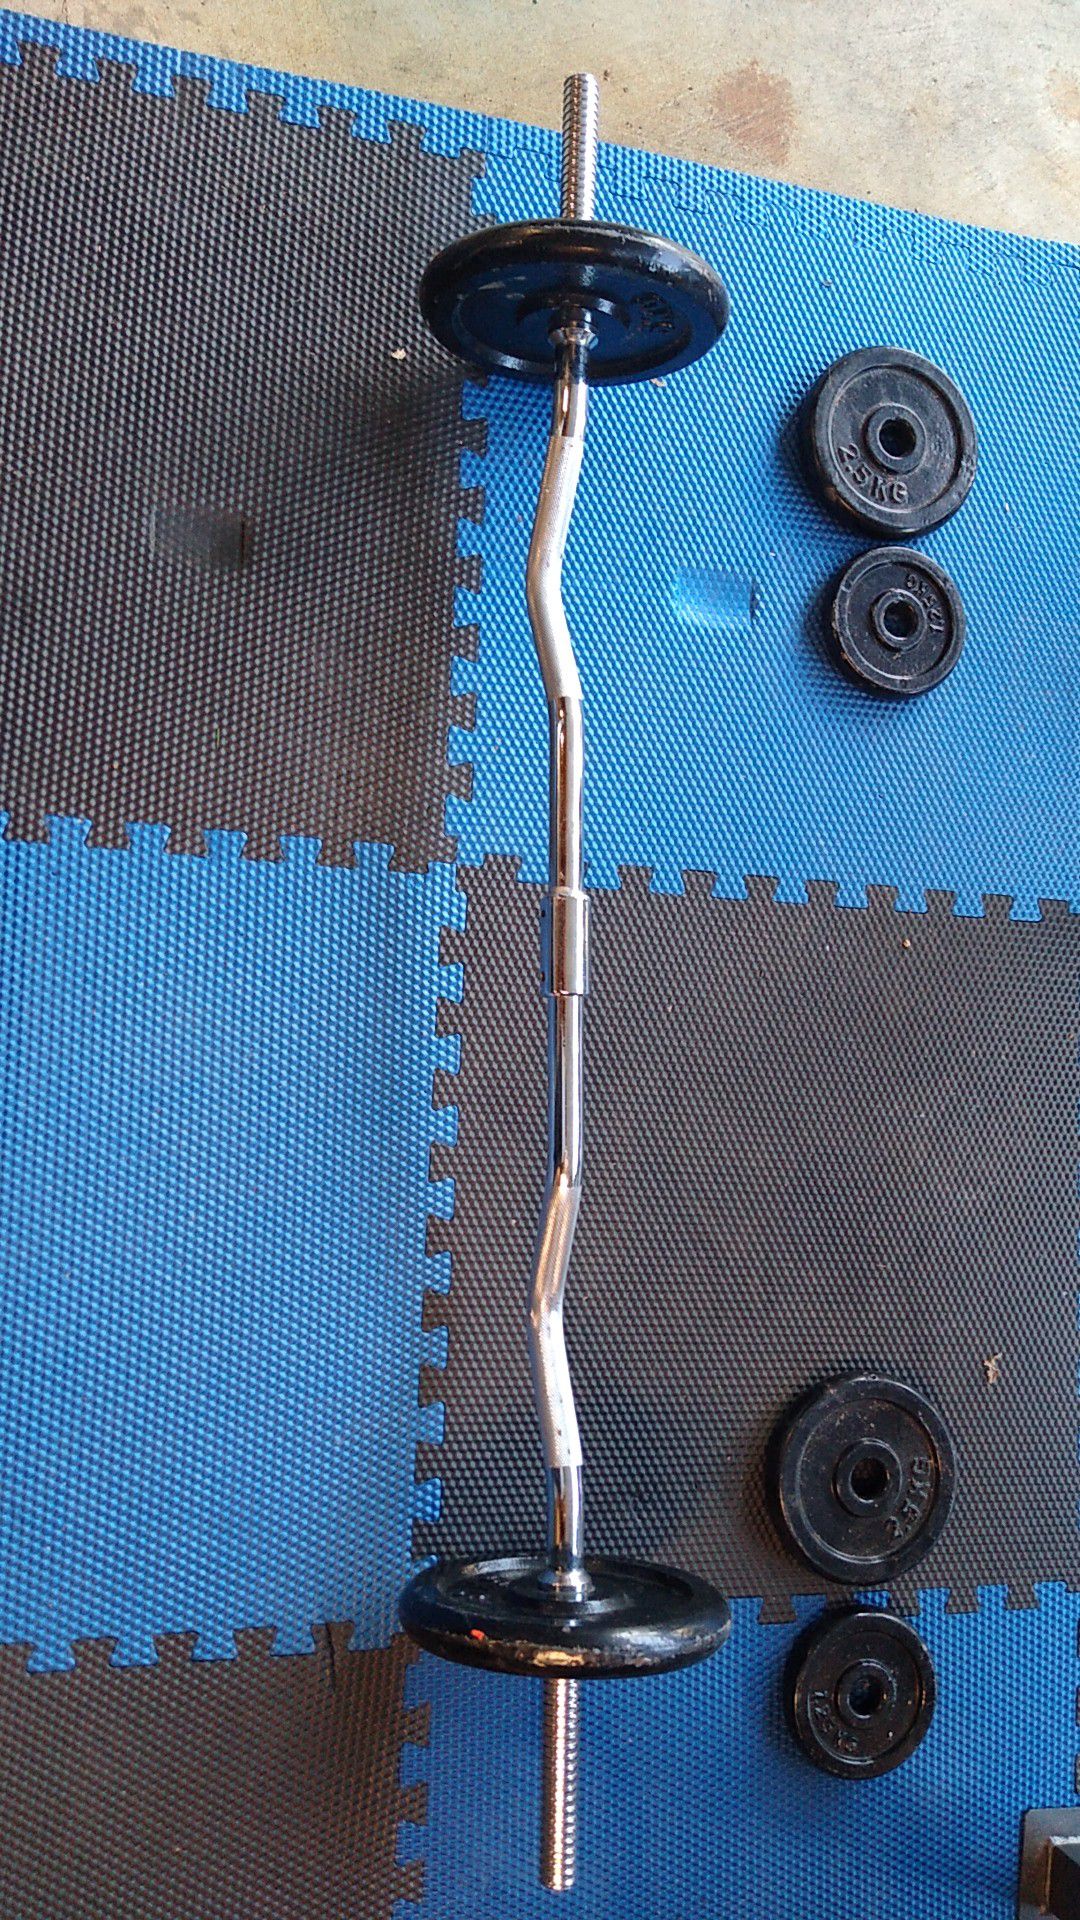 Curl bar with weights